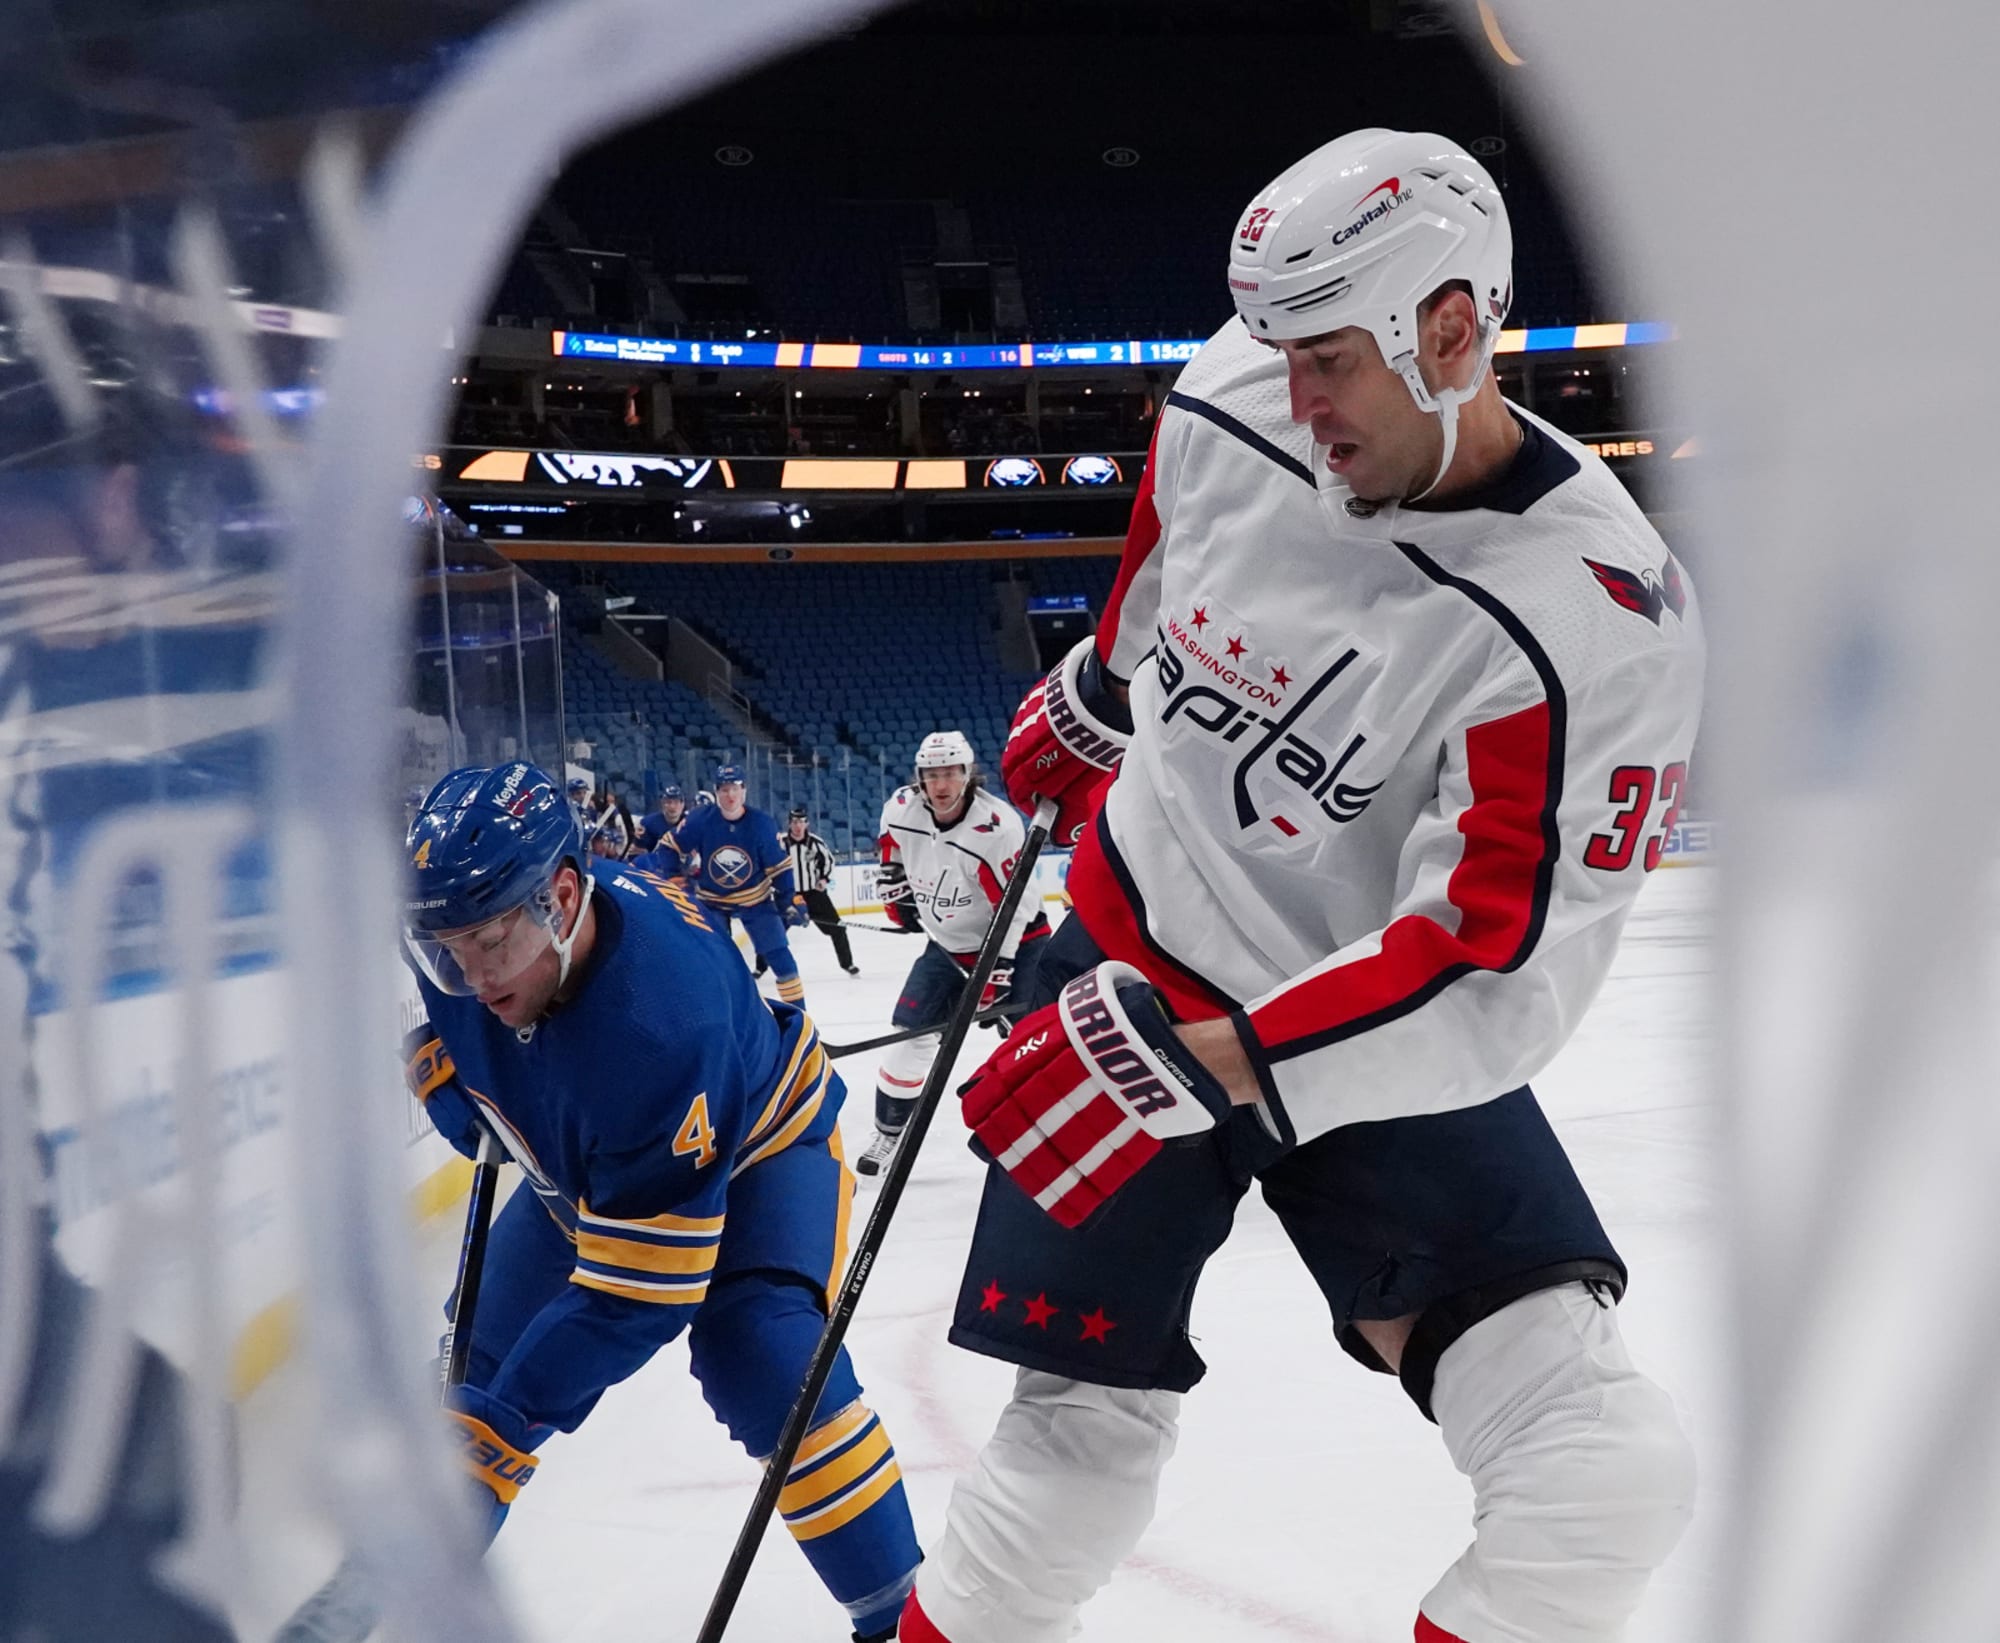 Washington Capitals: T.J. Oshie will be player to watch against Sabres